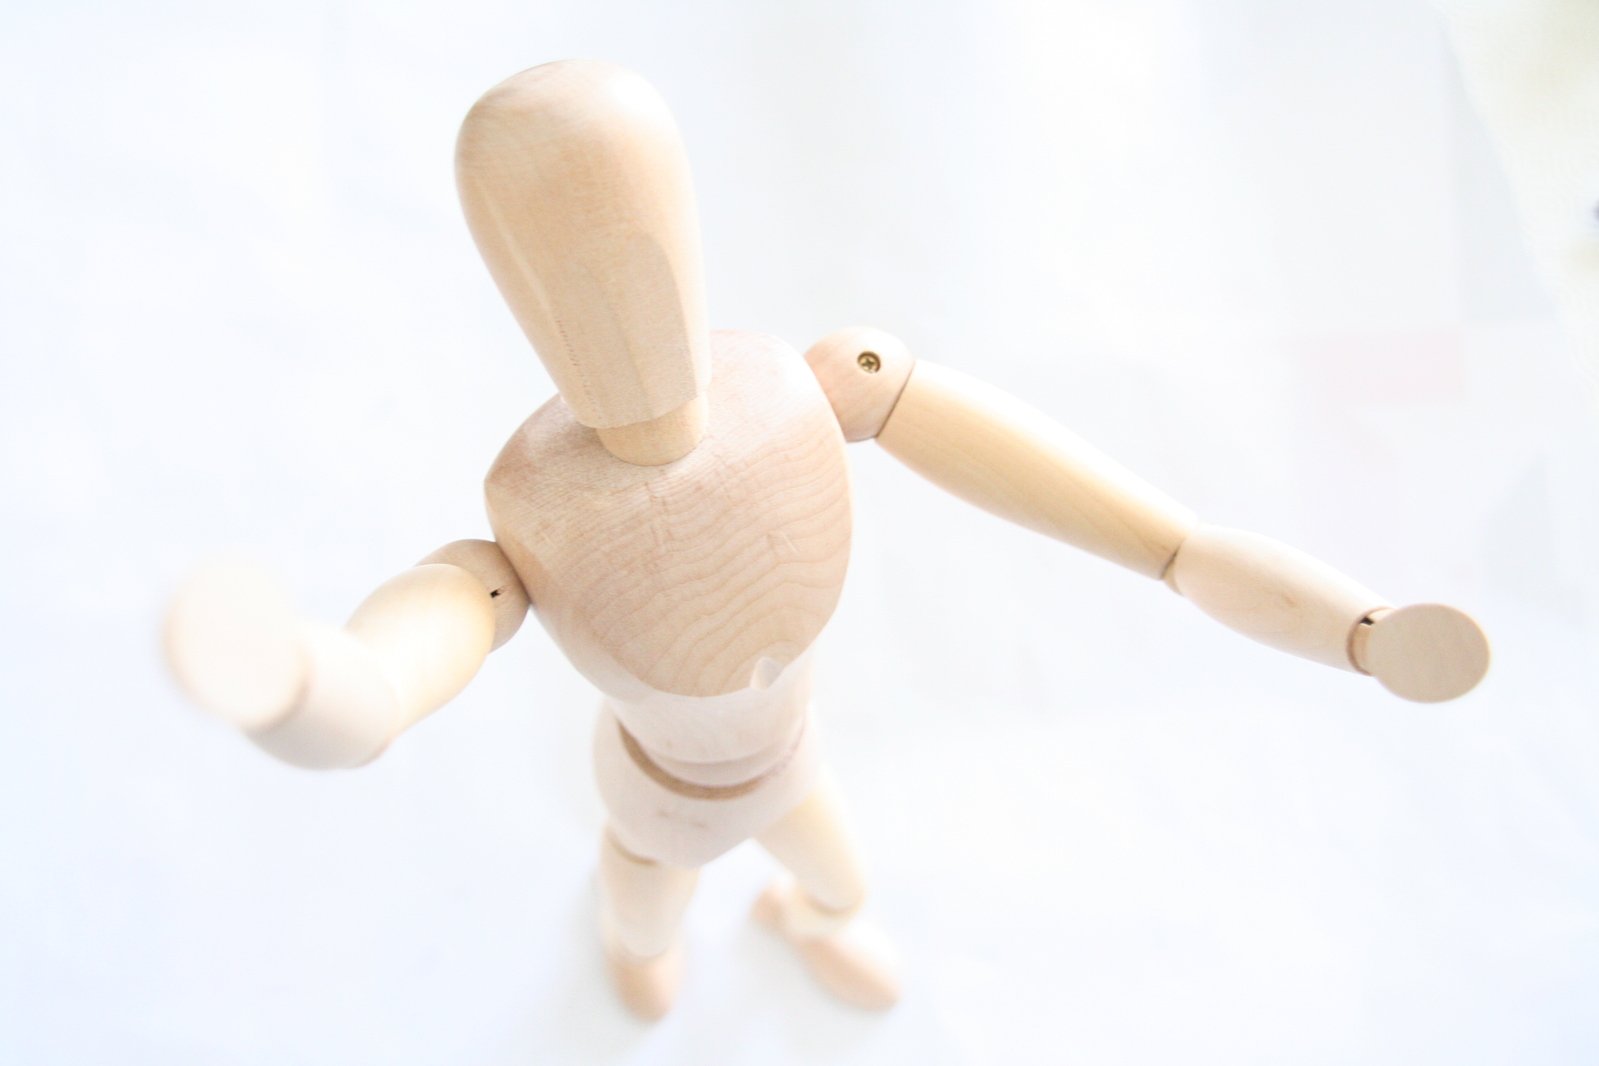 a doll with arm spread holding onto the leg